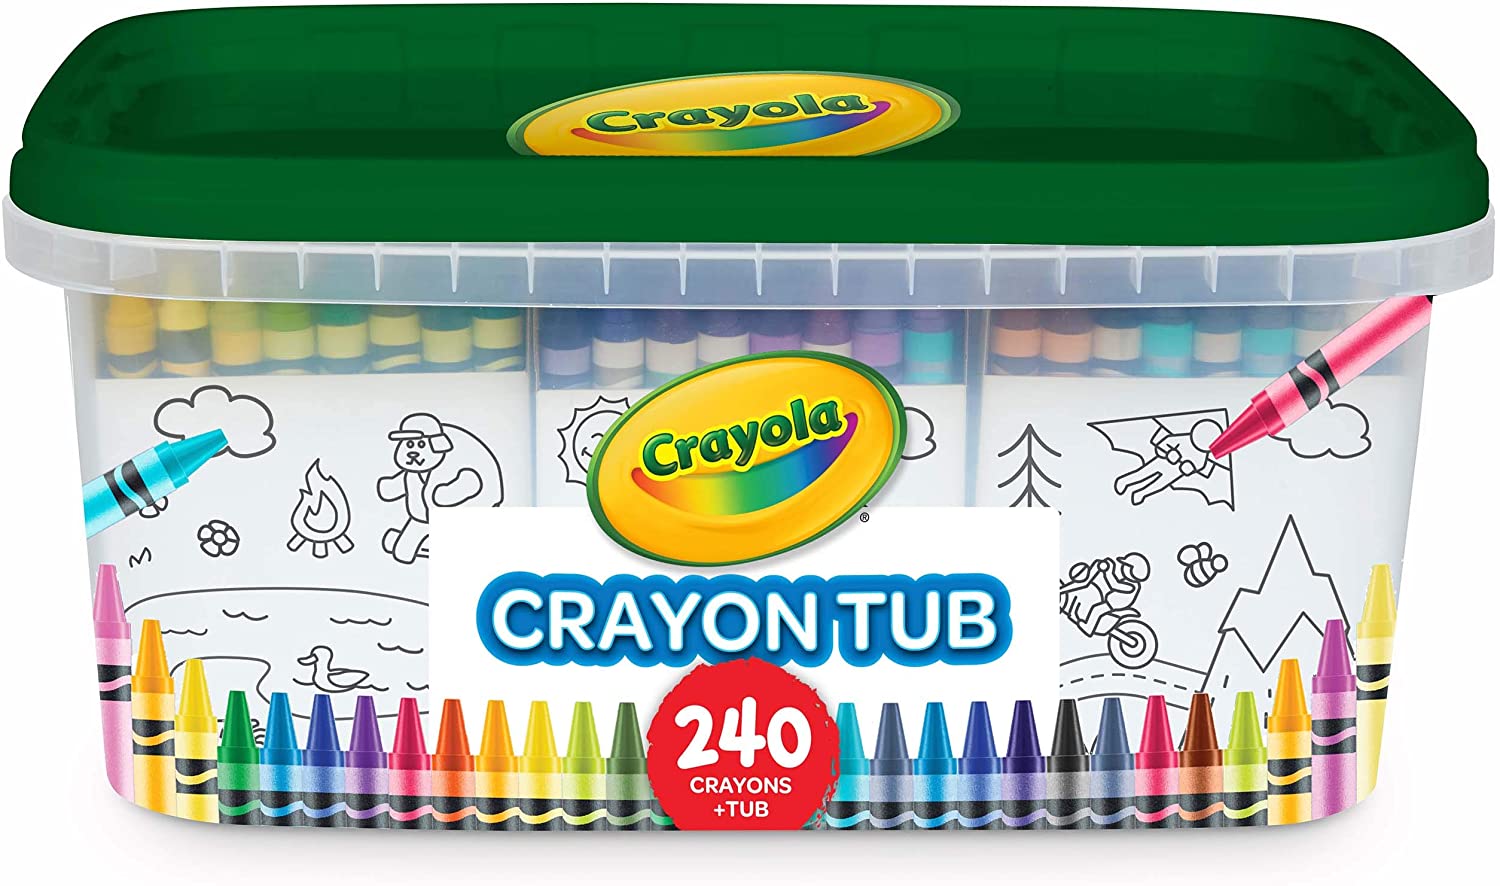  Crayola Crayon Tub - 120 Colors (240ct), Bulk Crayon Set for  Classrooms, Kids Coloring & Art Supplies, Resealable Storage, Ages 3+  [ Exclusive] : Everything Else